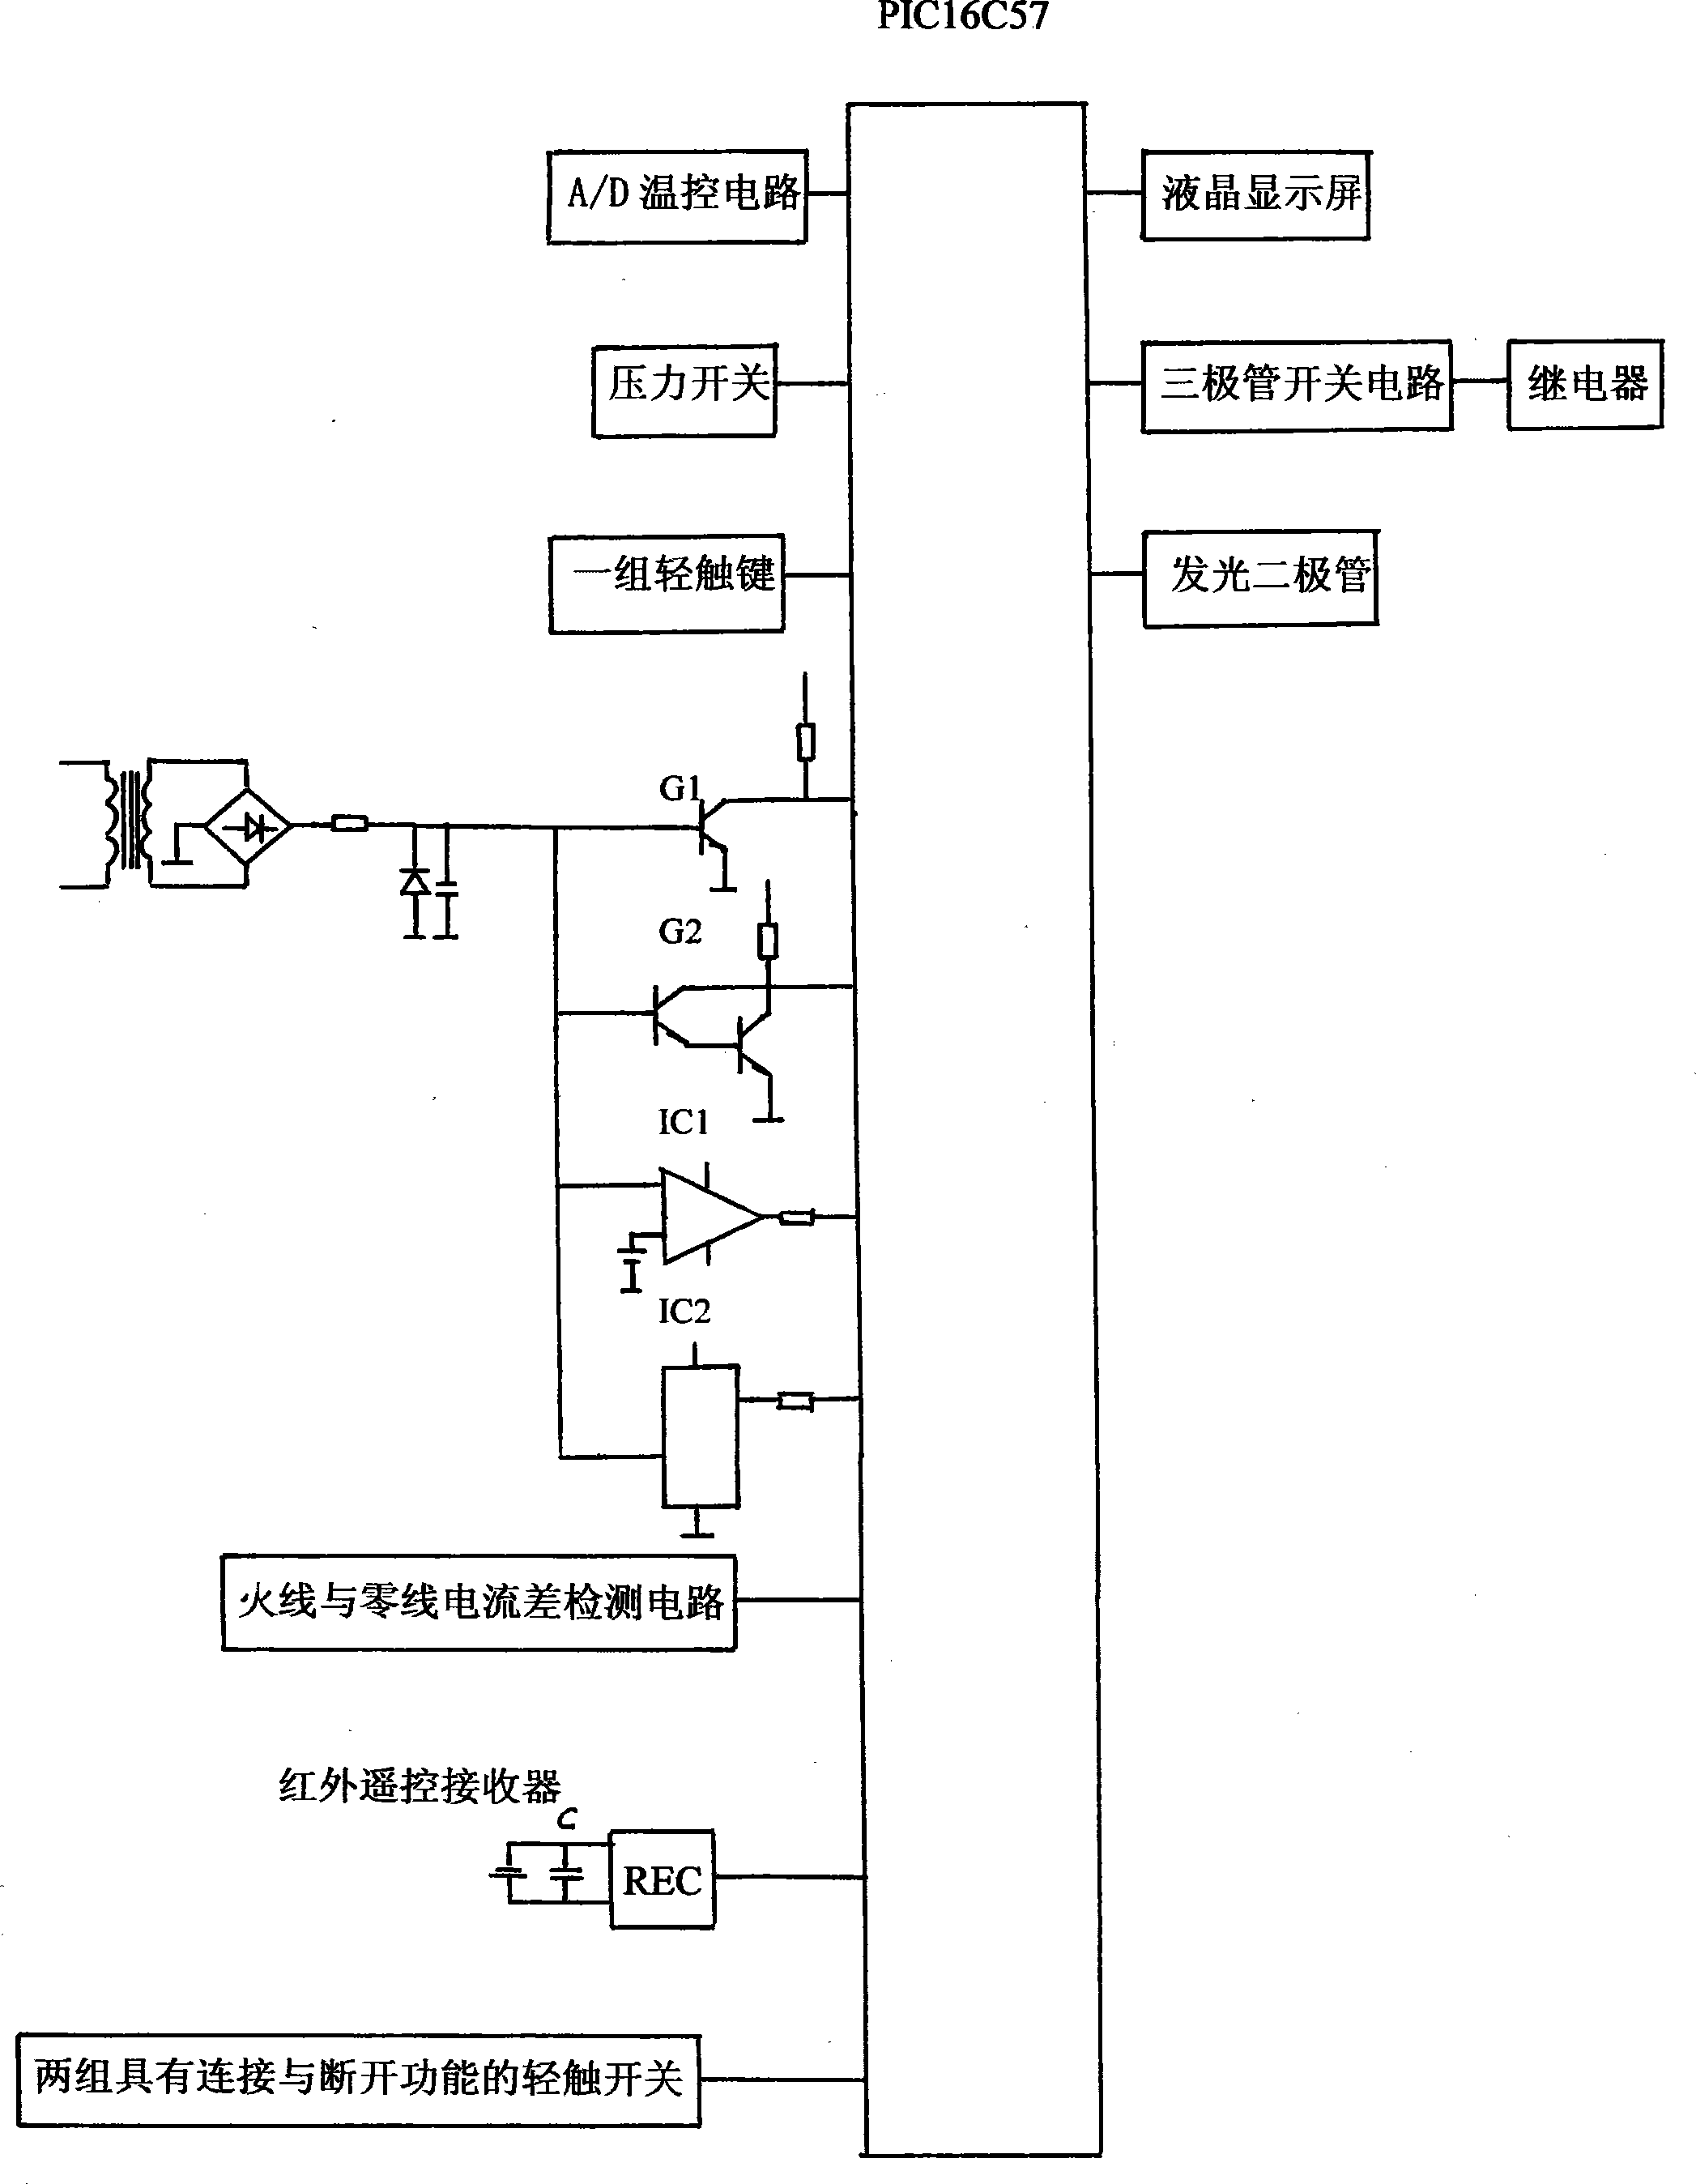 Electrothermic boiled water pot intelligent control circuit with multiple collecting functions